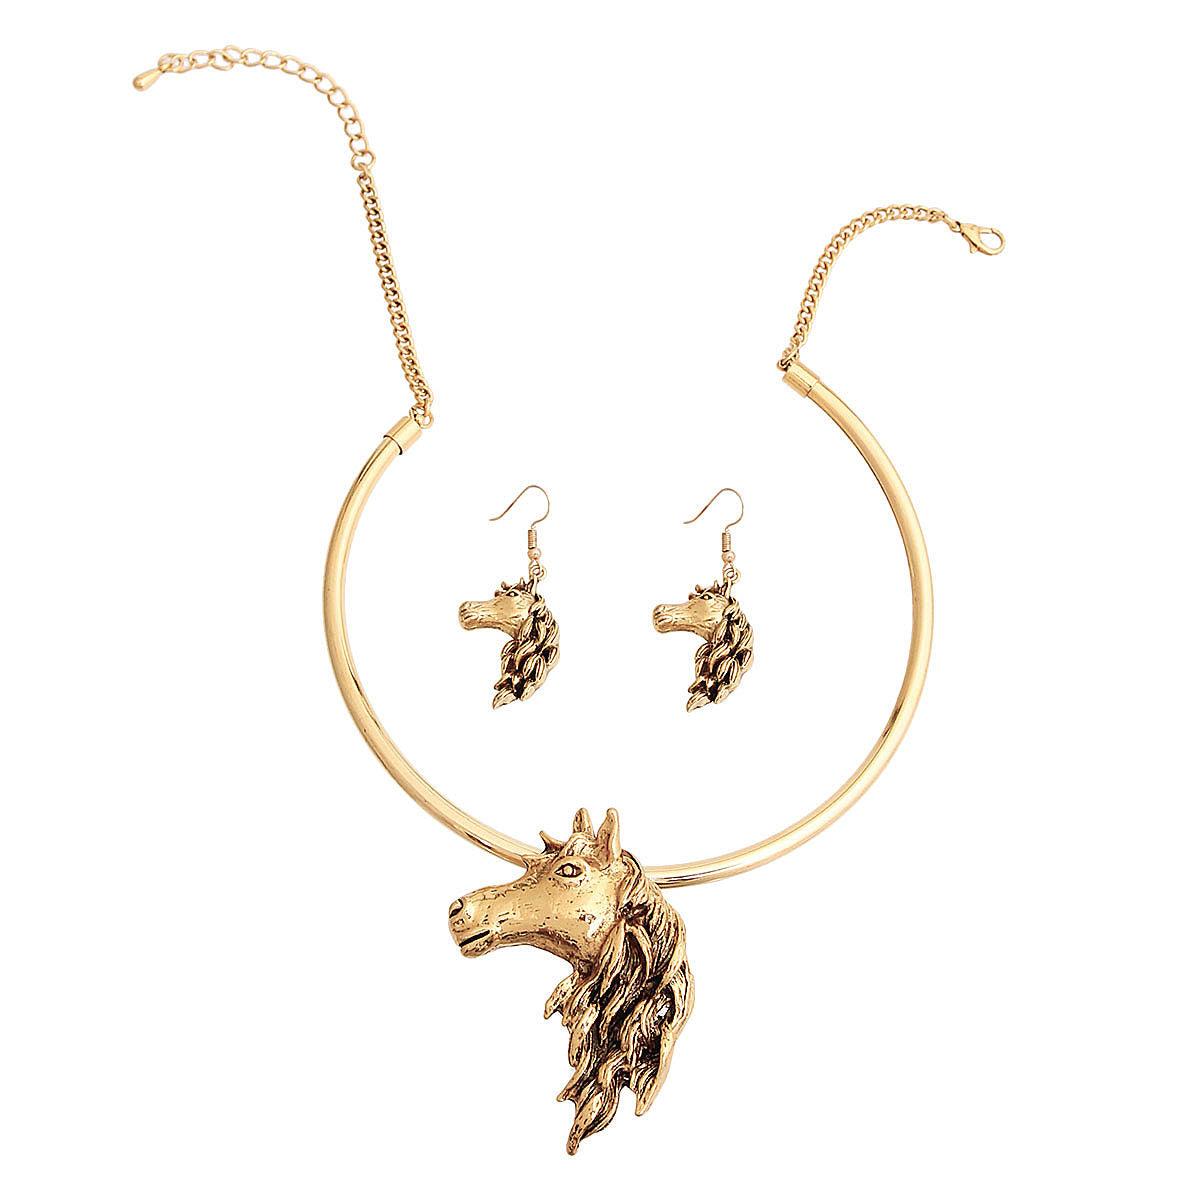 Horse Lovers' Jewelry: Gold Tone Earrings & Necklace Set